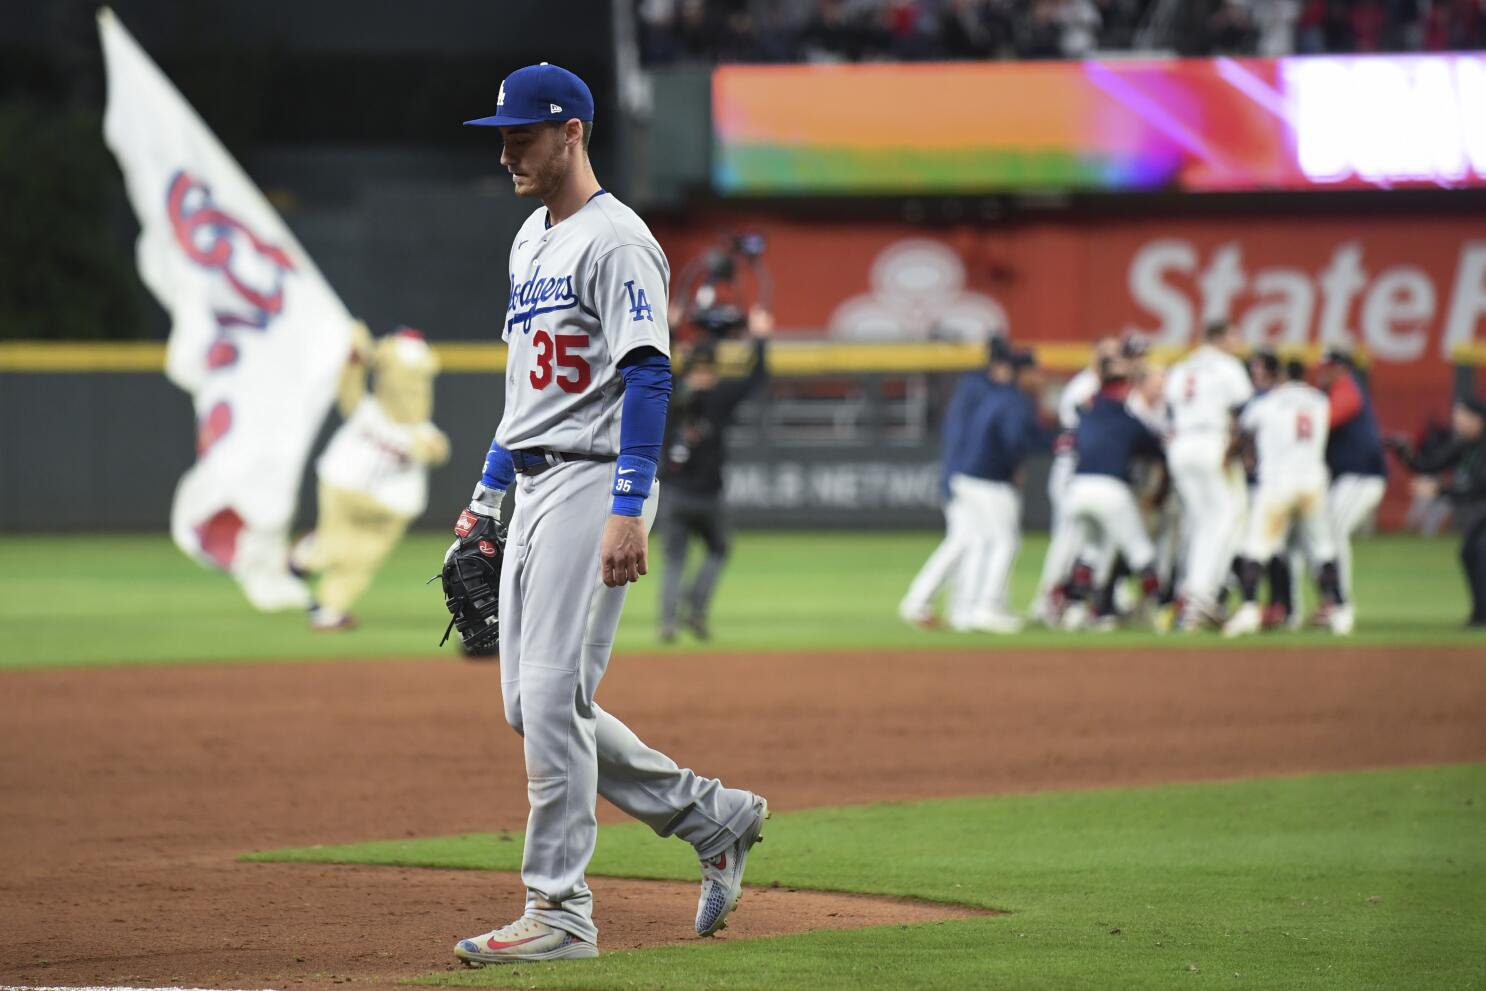 Just bad pitching': Kershaw pulled after six-run first inning in Dodgers'  playoff loss, MLB